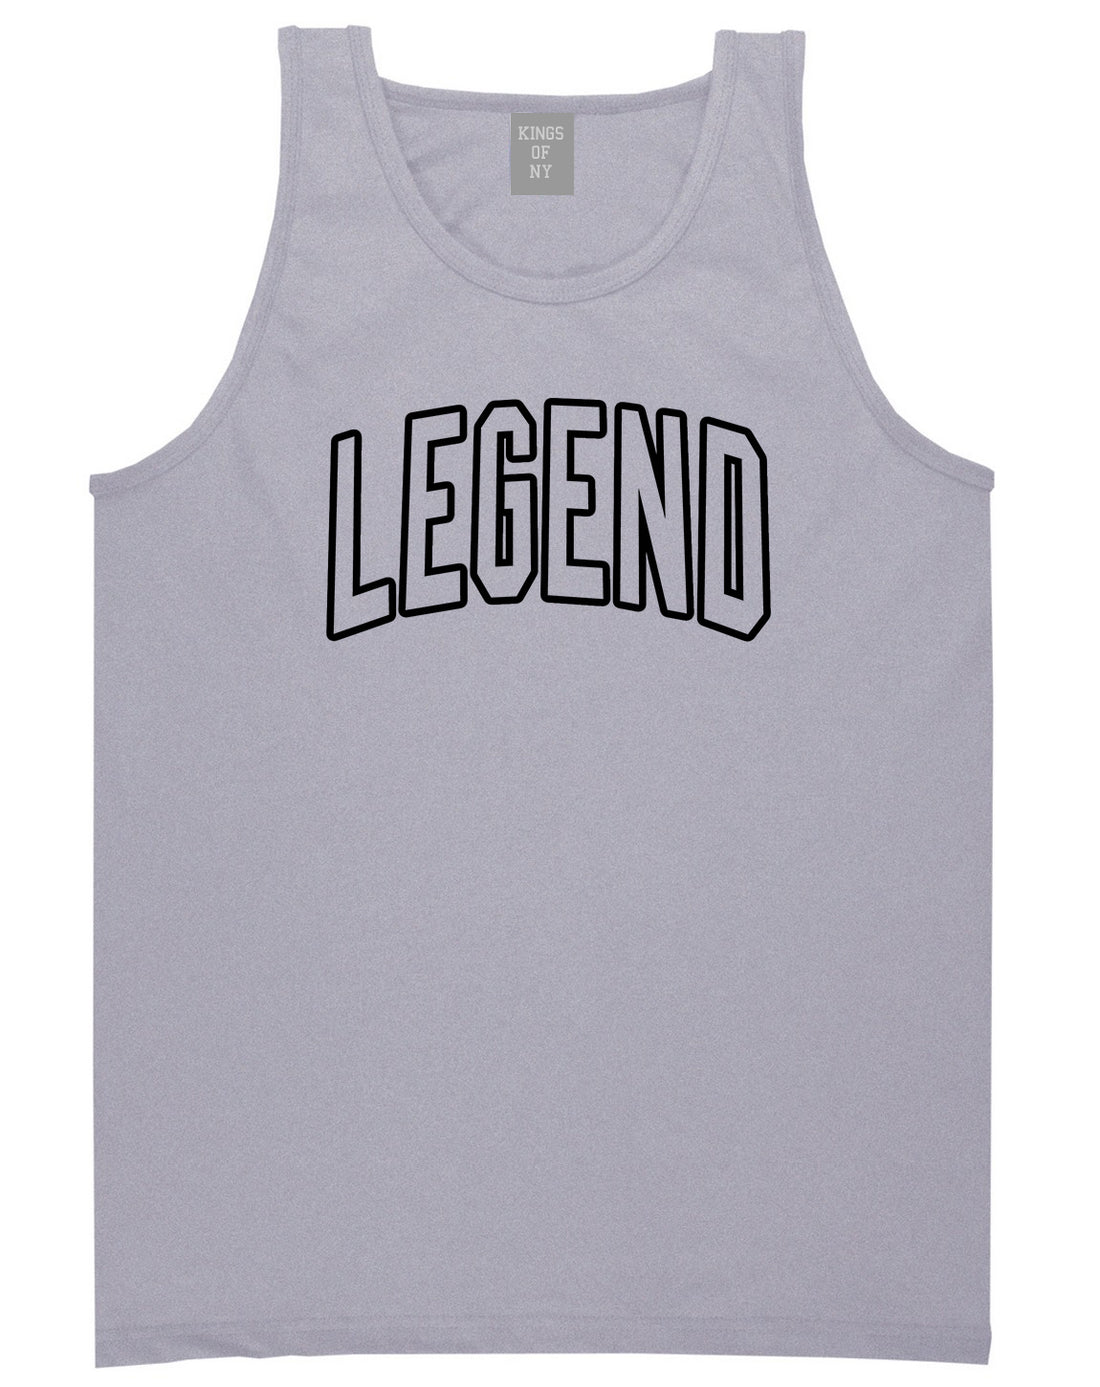 Legend Outline Mens Tank Top Shirt Grey by Kings Of NY